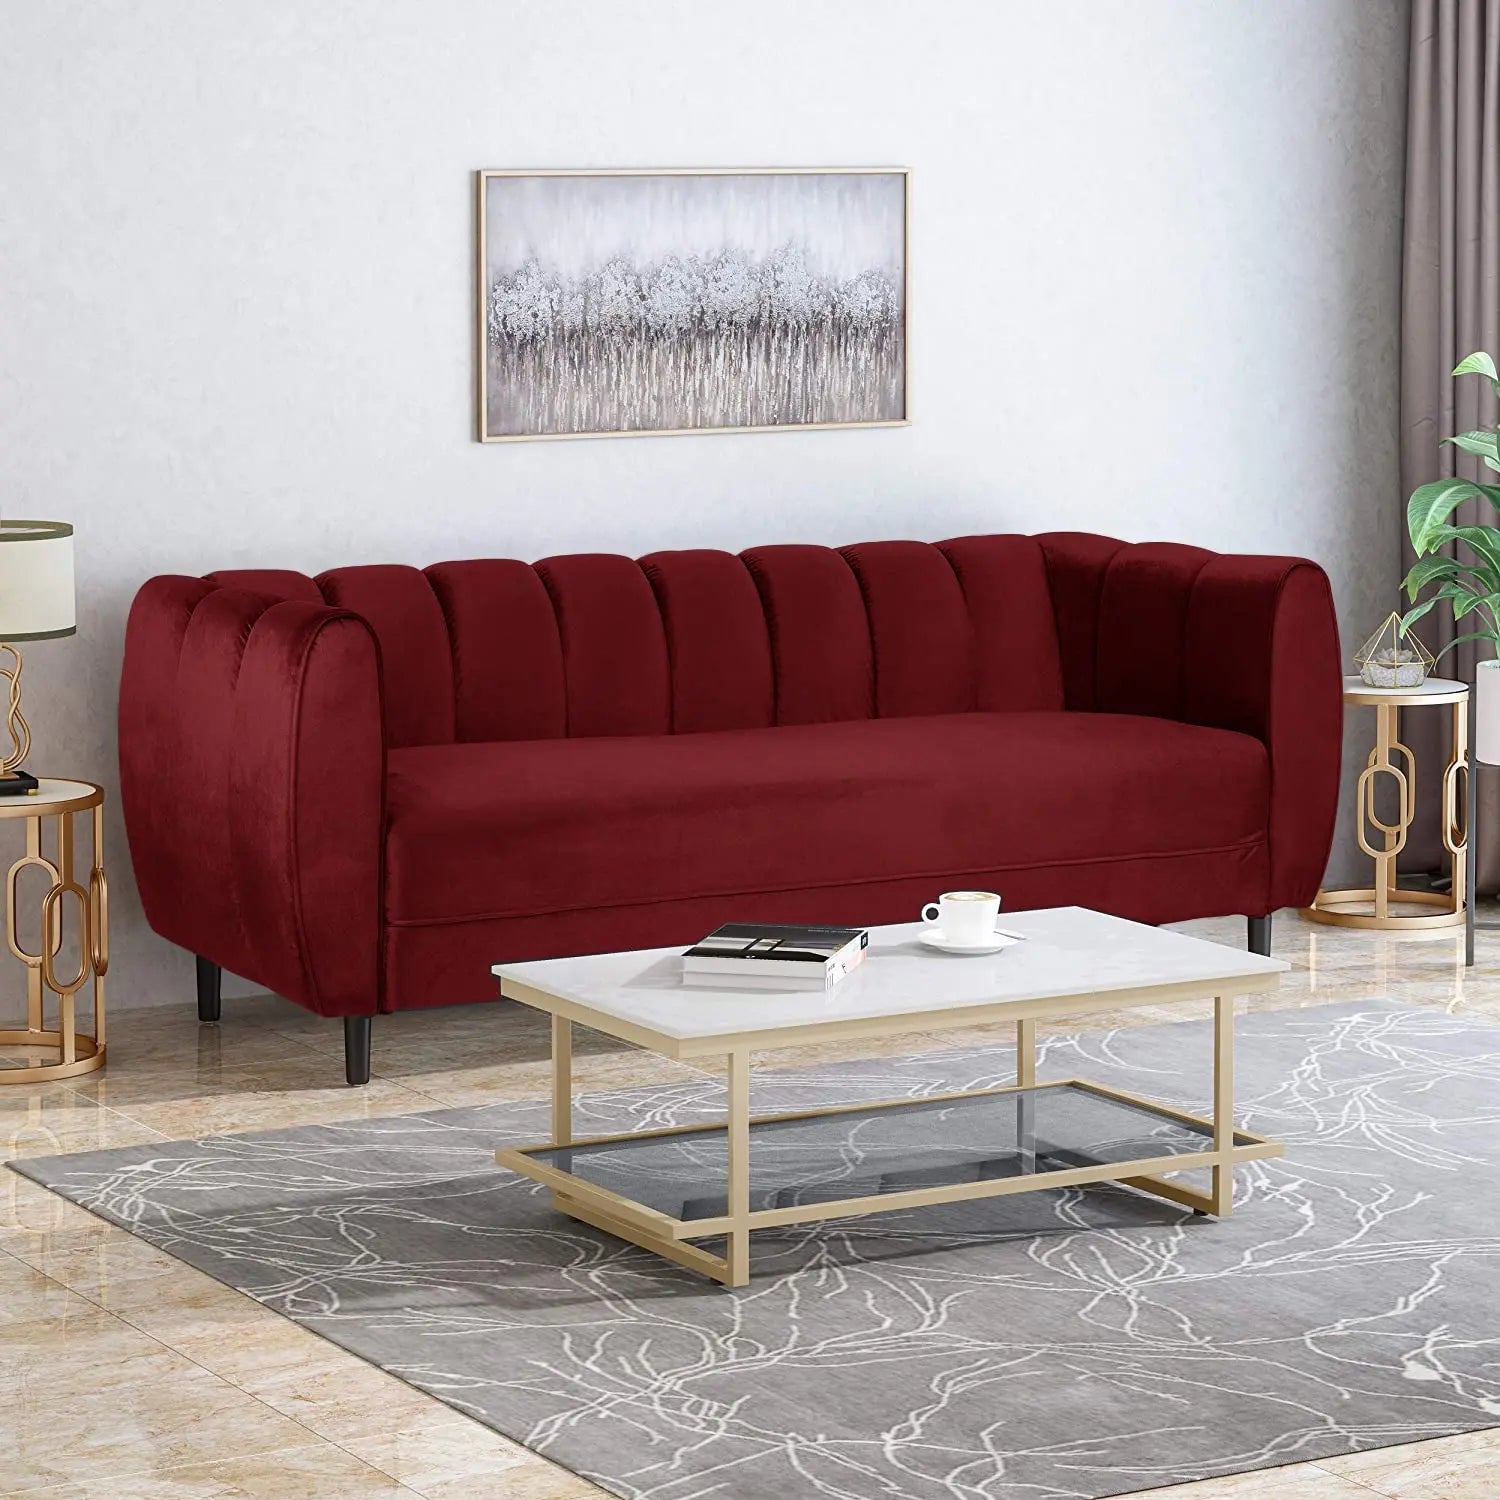 Sofa Mazy- Meridian Fabric 3 Seater Chesterfield Sofa Chaise Lounge Sectional Wooden Sofa for Living Room Bedroom Office Furneez